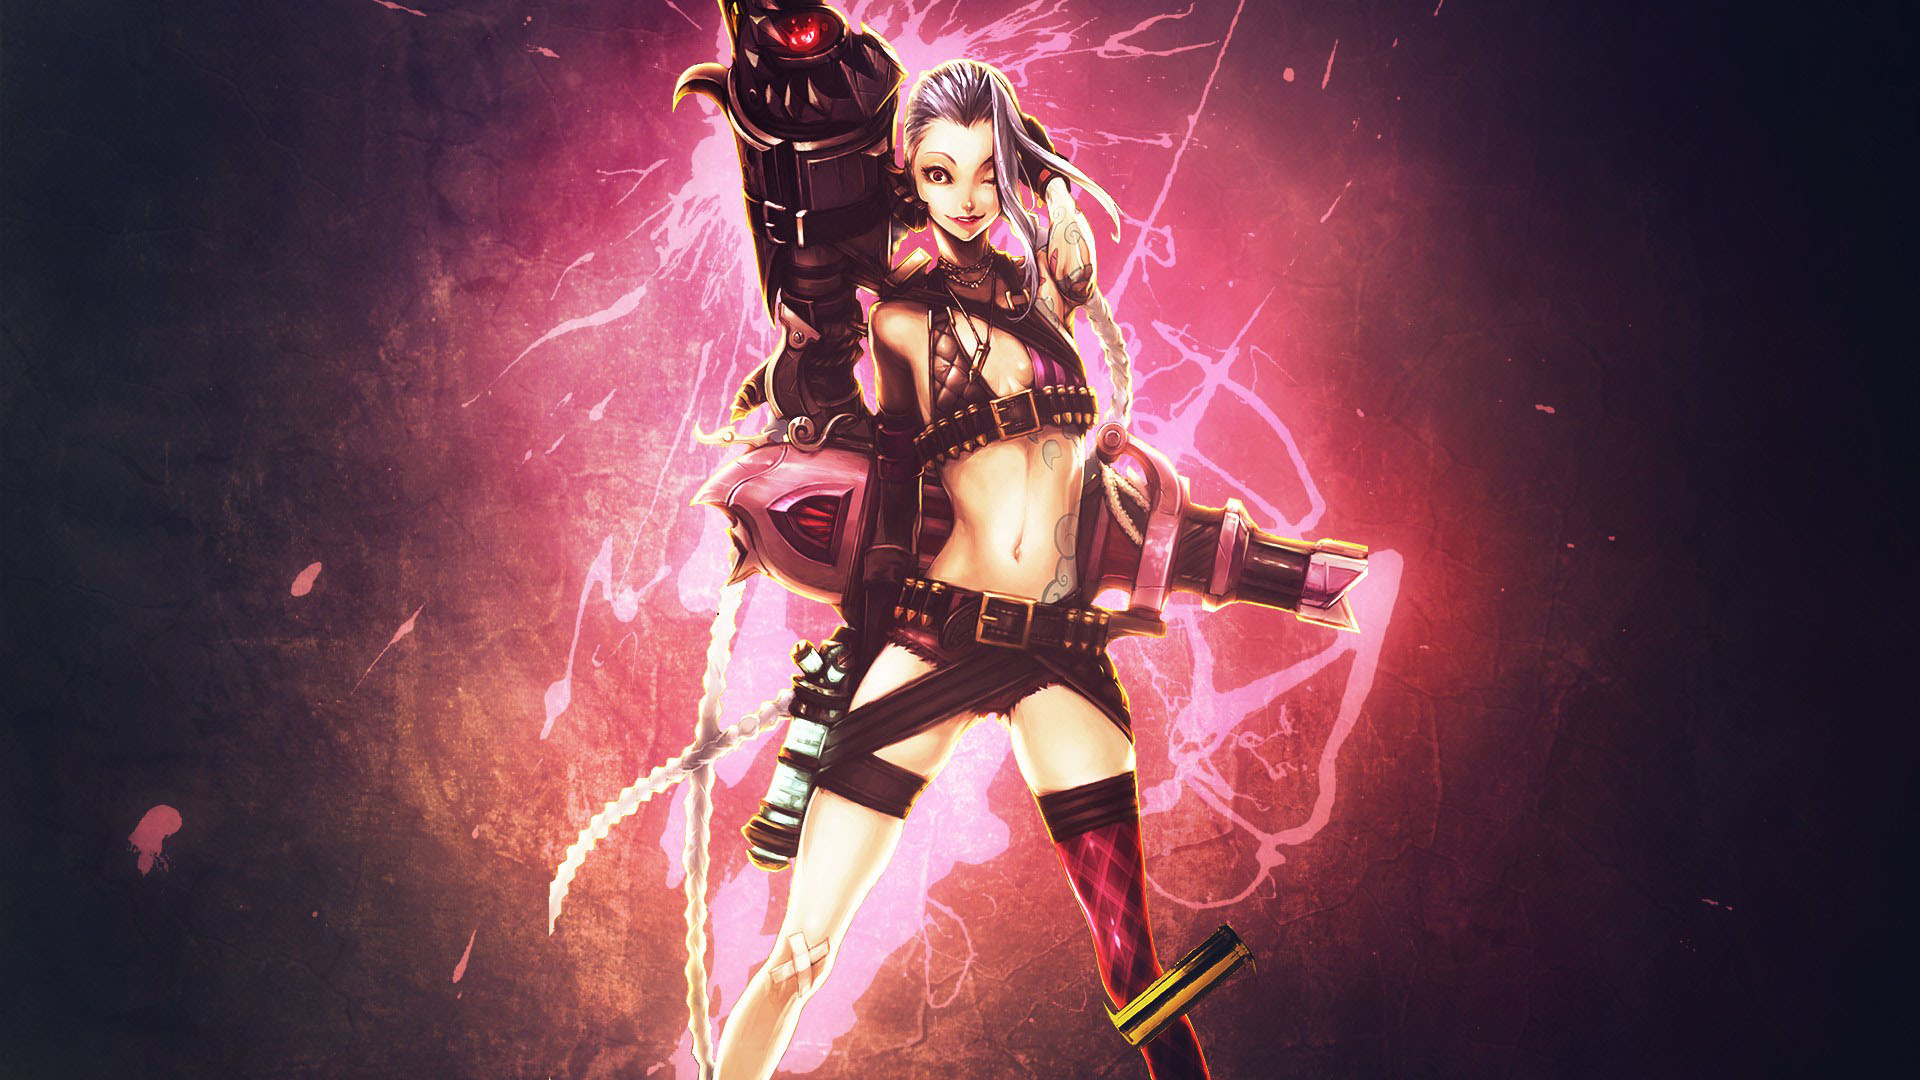 Wallpaper League Of Legends Jinx For iPhone Android